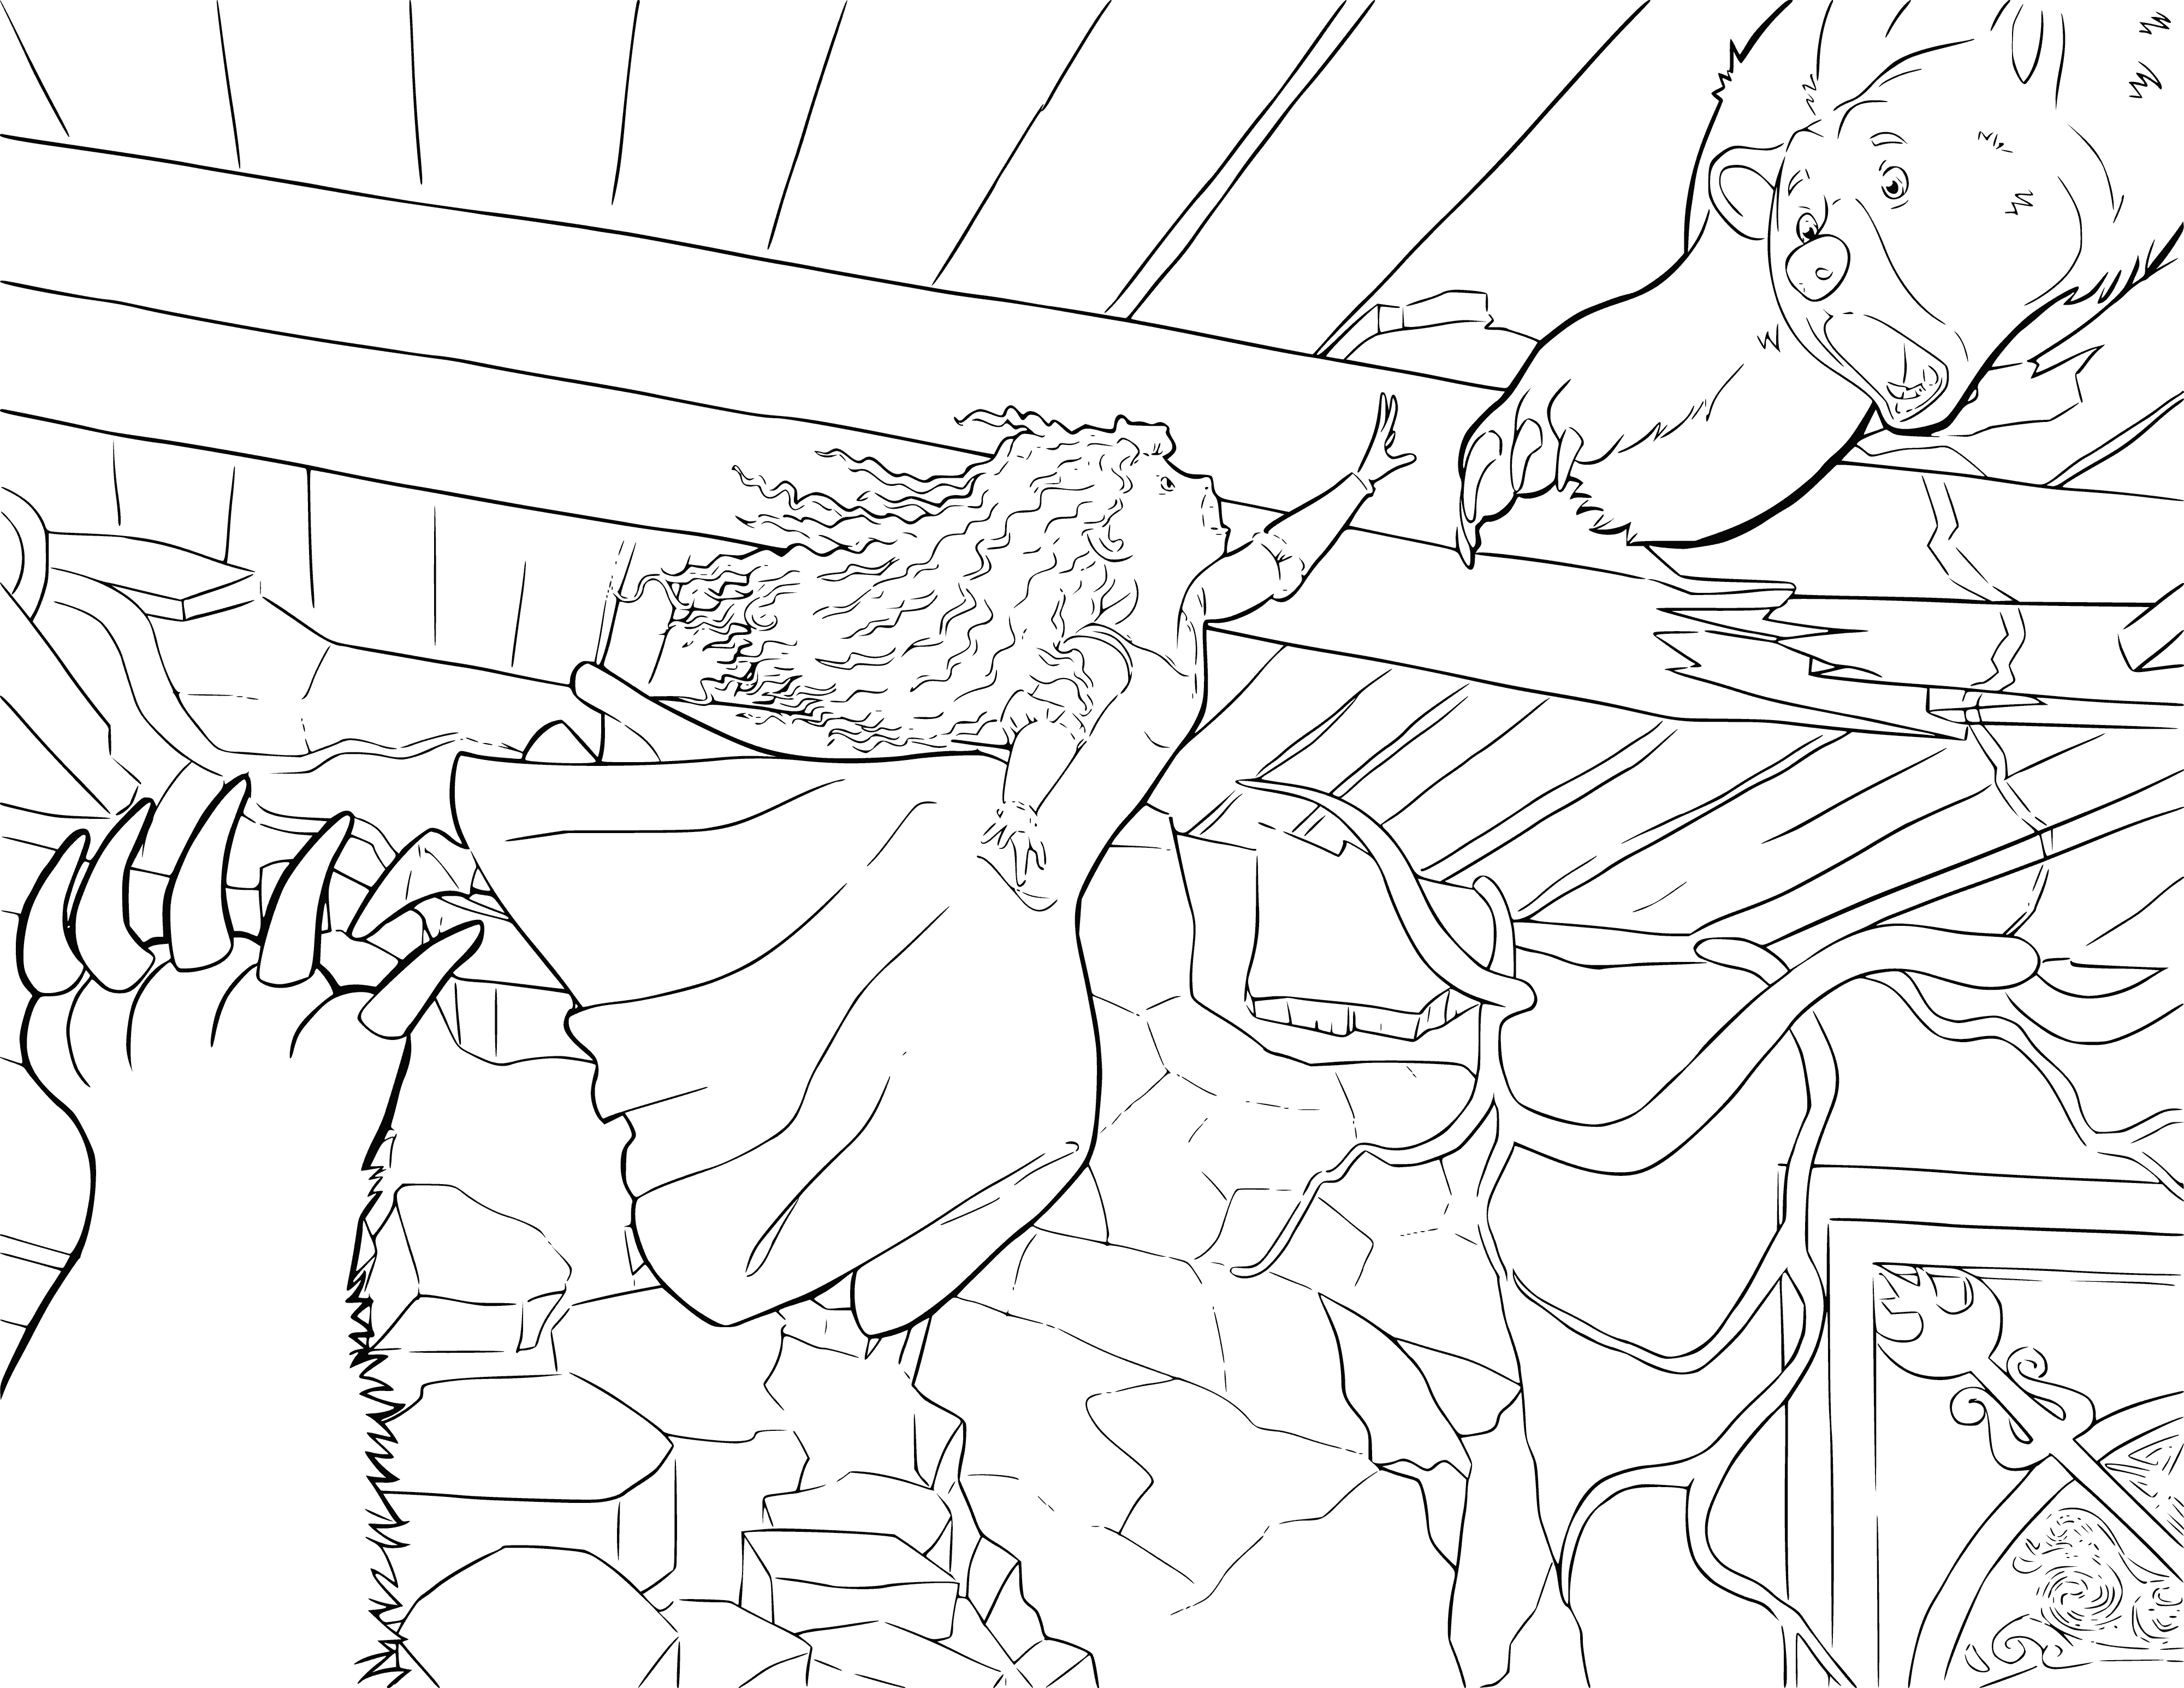 coloring page: Mother saving daughter with a sword & breaking muzzle; daughter holds onto mother's dress.